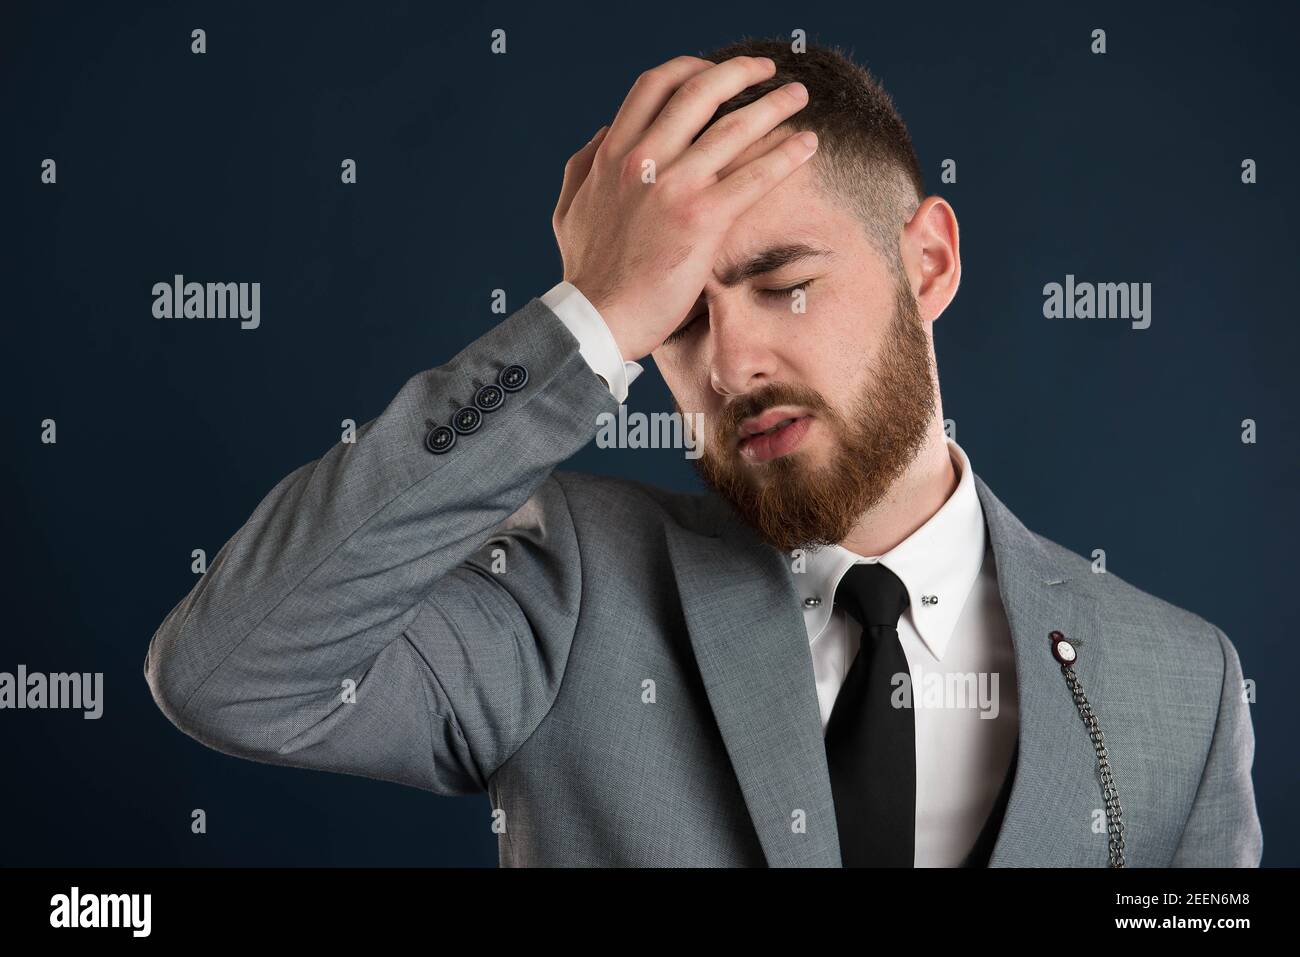 Handsome businessman having a headache wearing a black tie and a grey suit Stock Photo